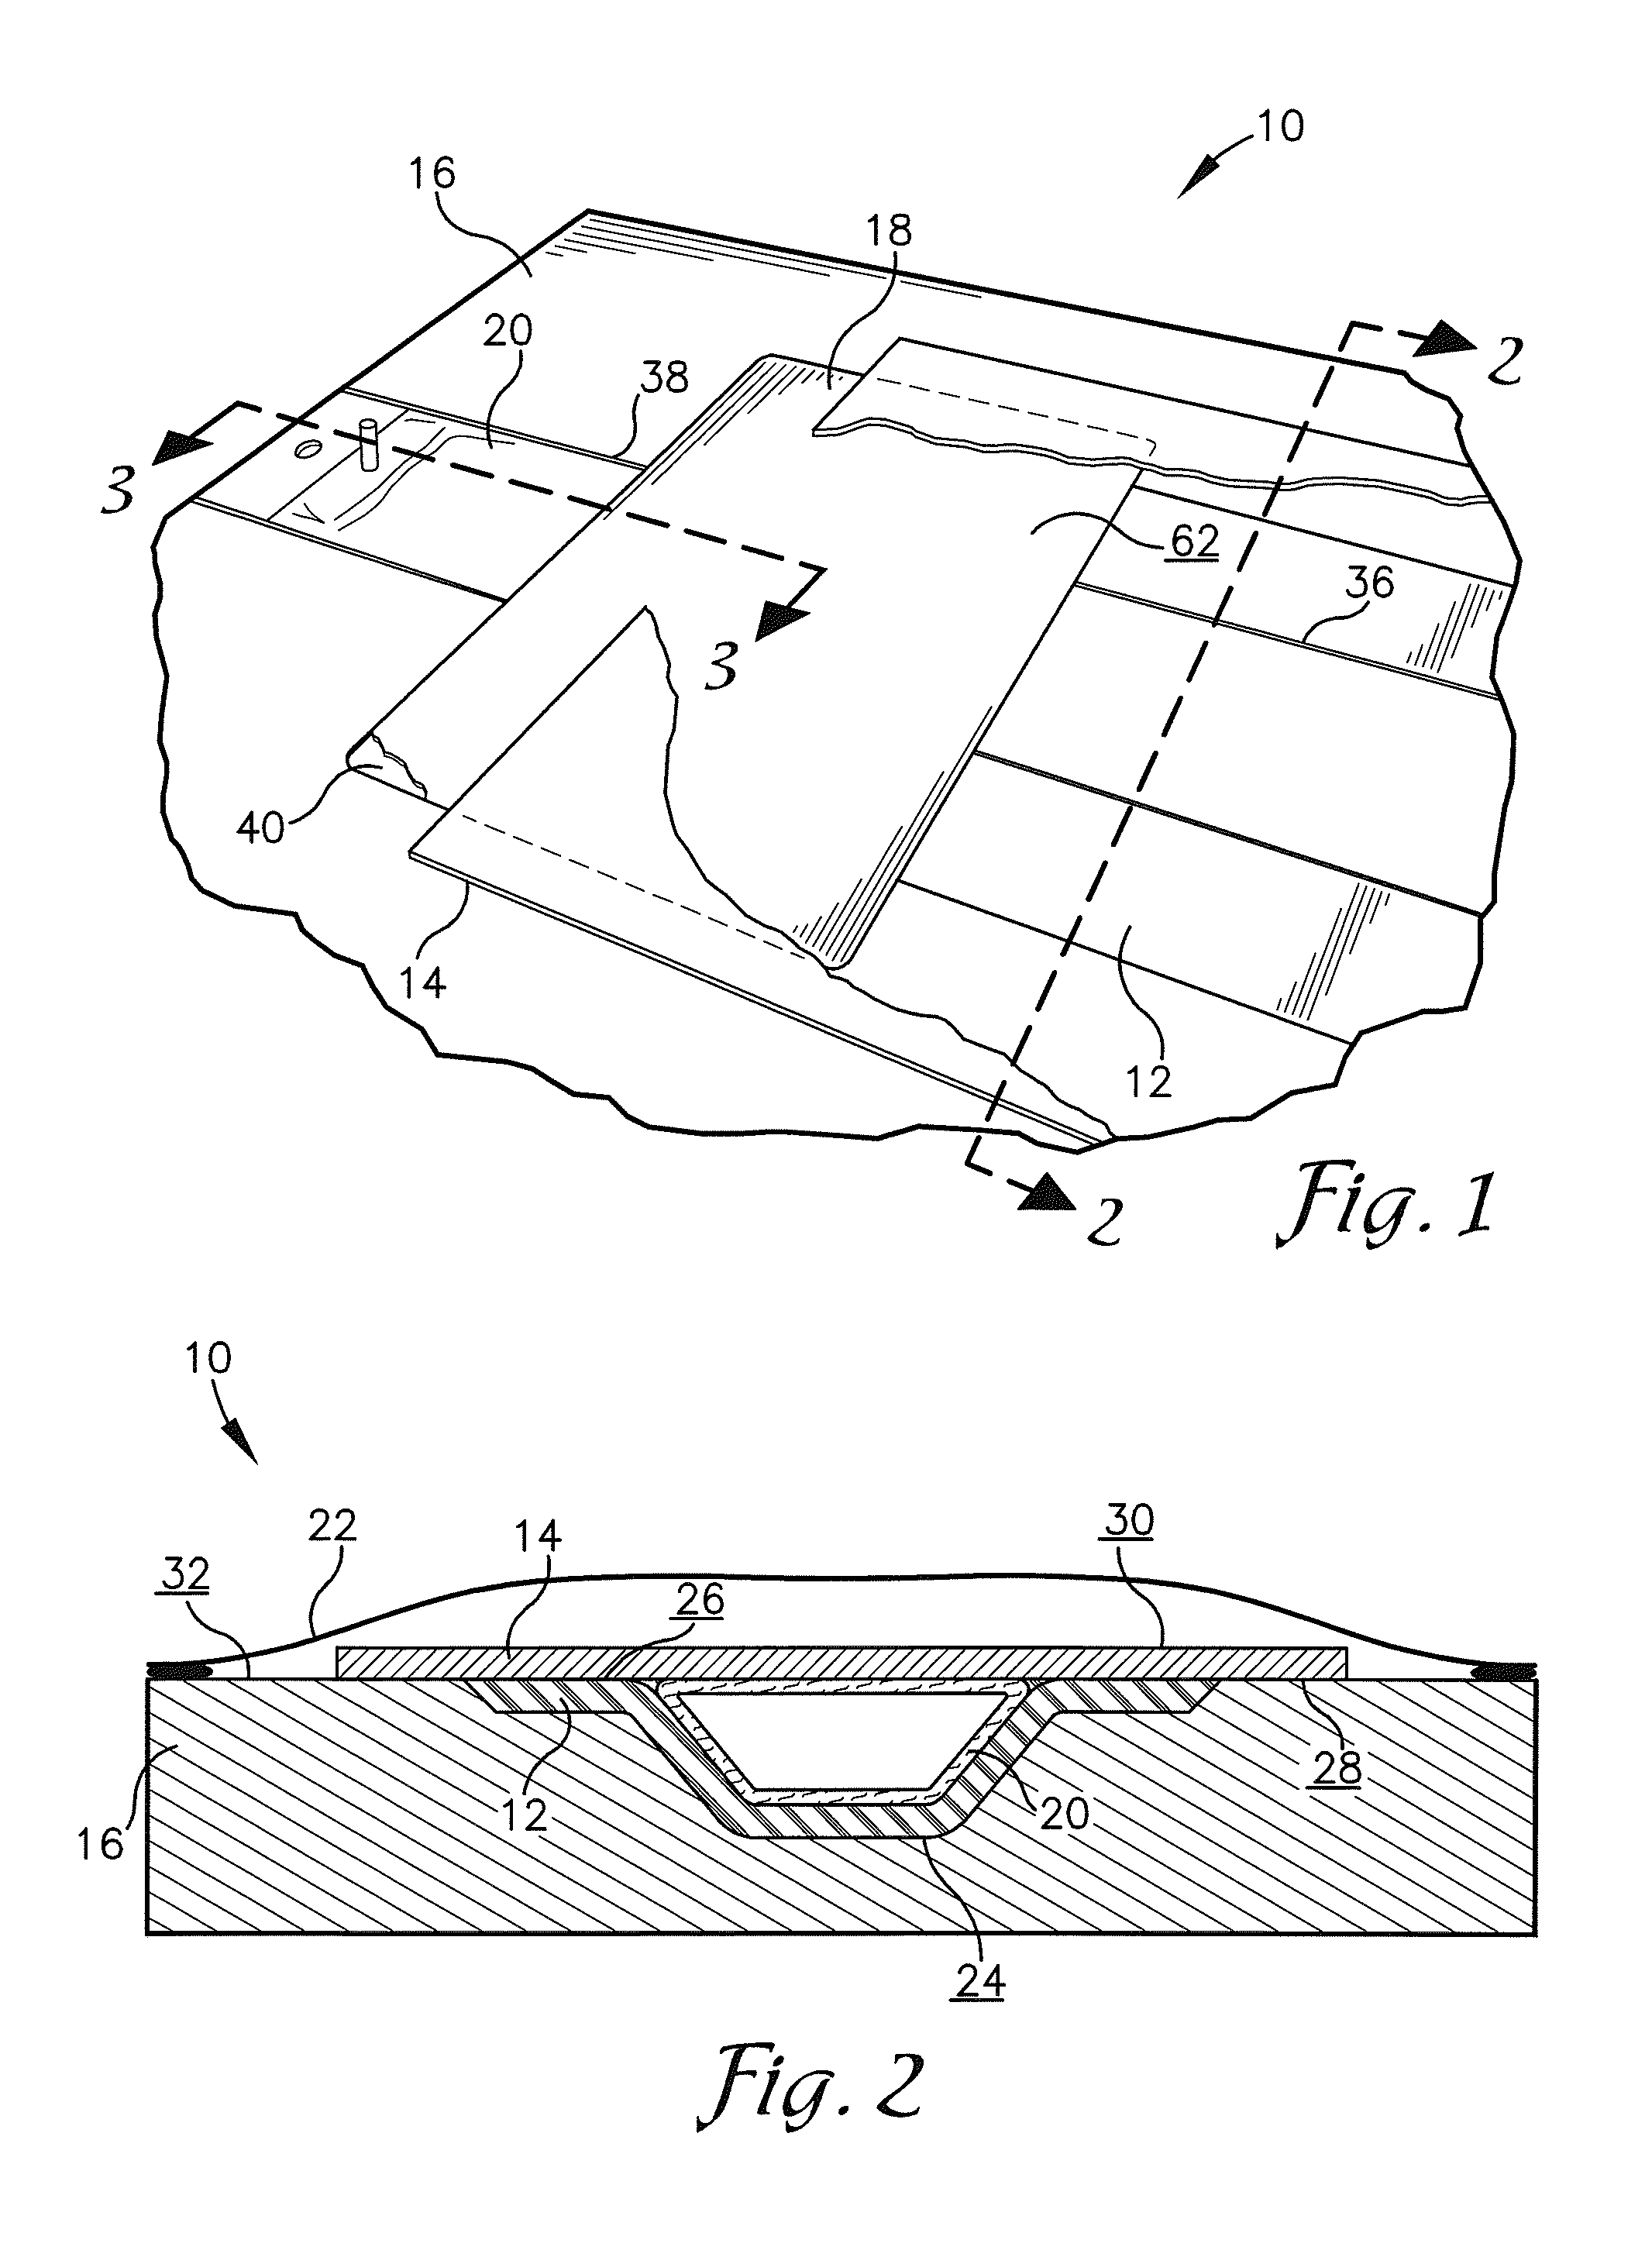 Method and tooling for manufacture of co-cured composite structures